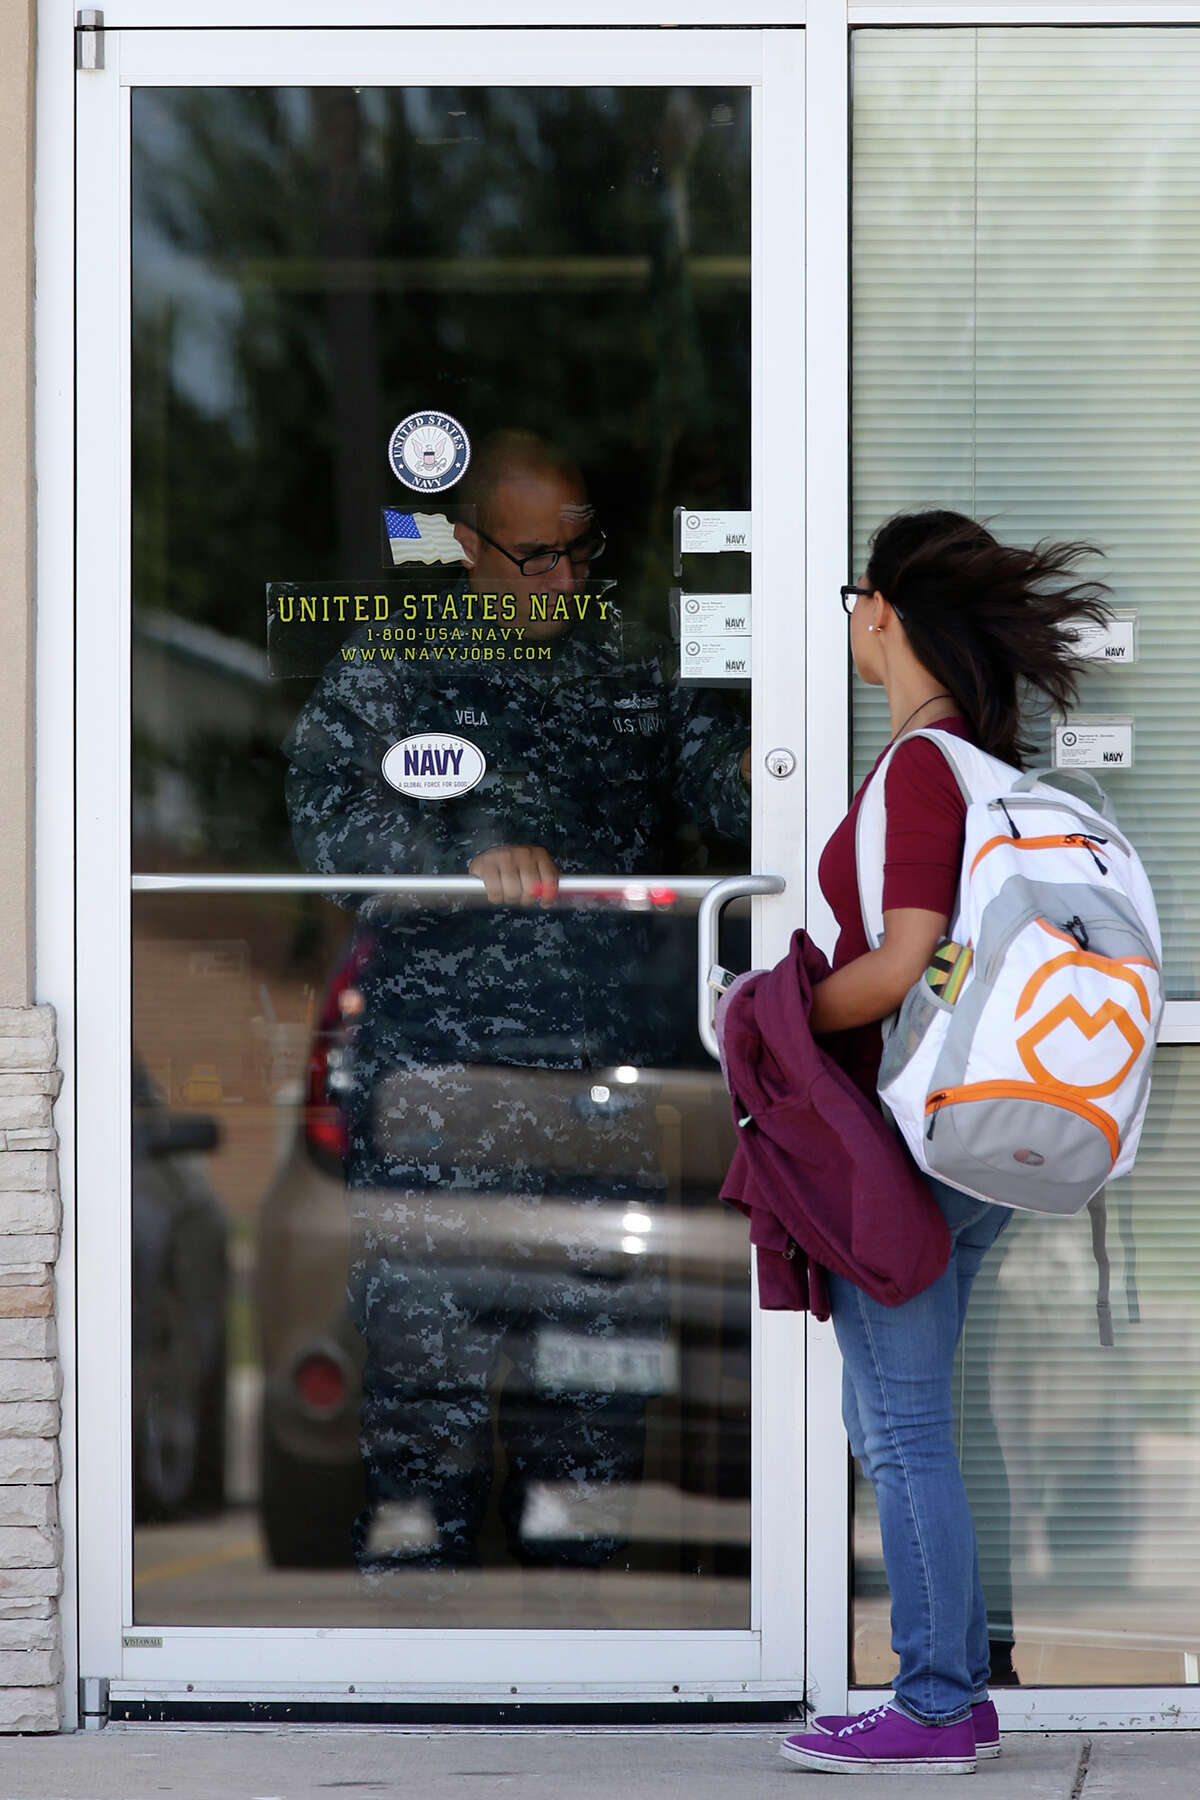 A recruiter opens a locked door on Wednesday at the U.S. Navy recruiting office in the Armed Forces Career Center in McAllen﻿.